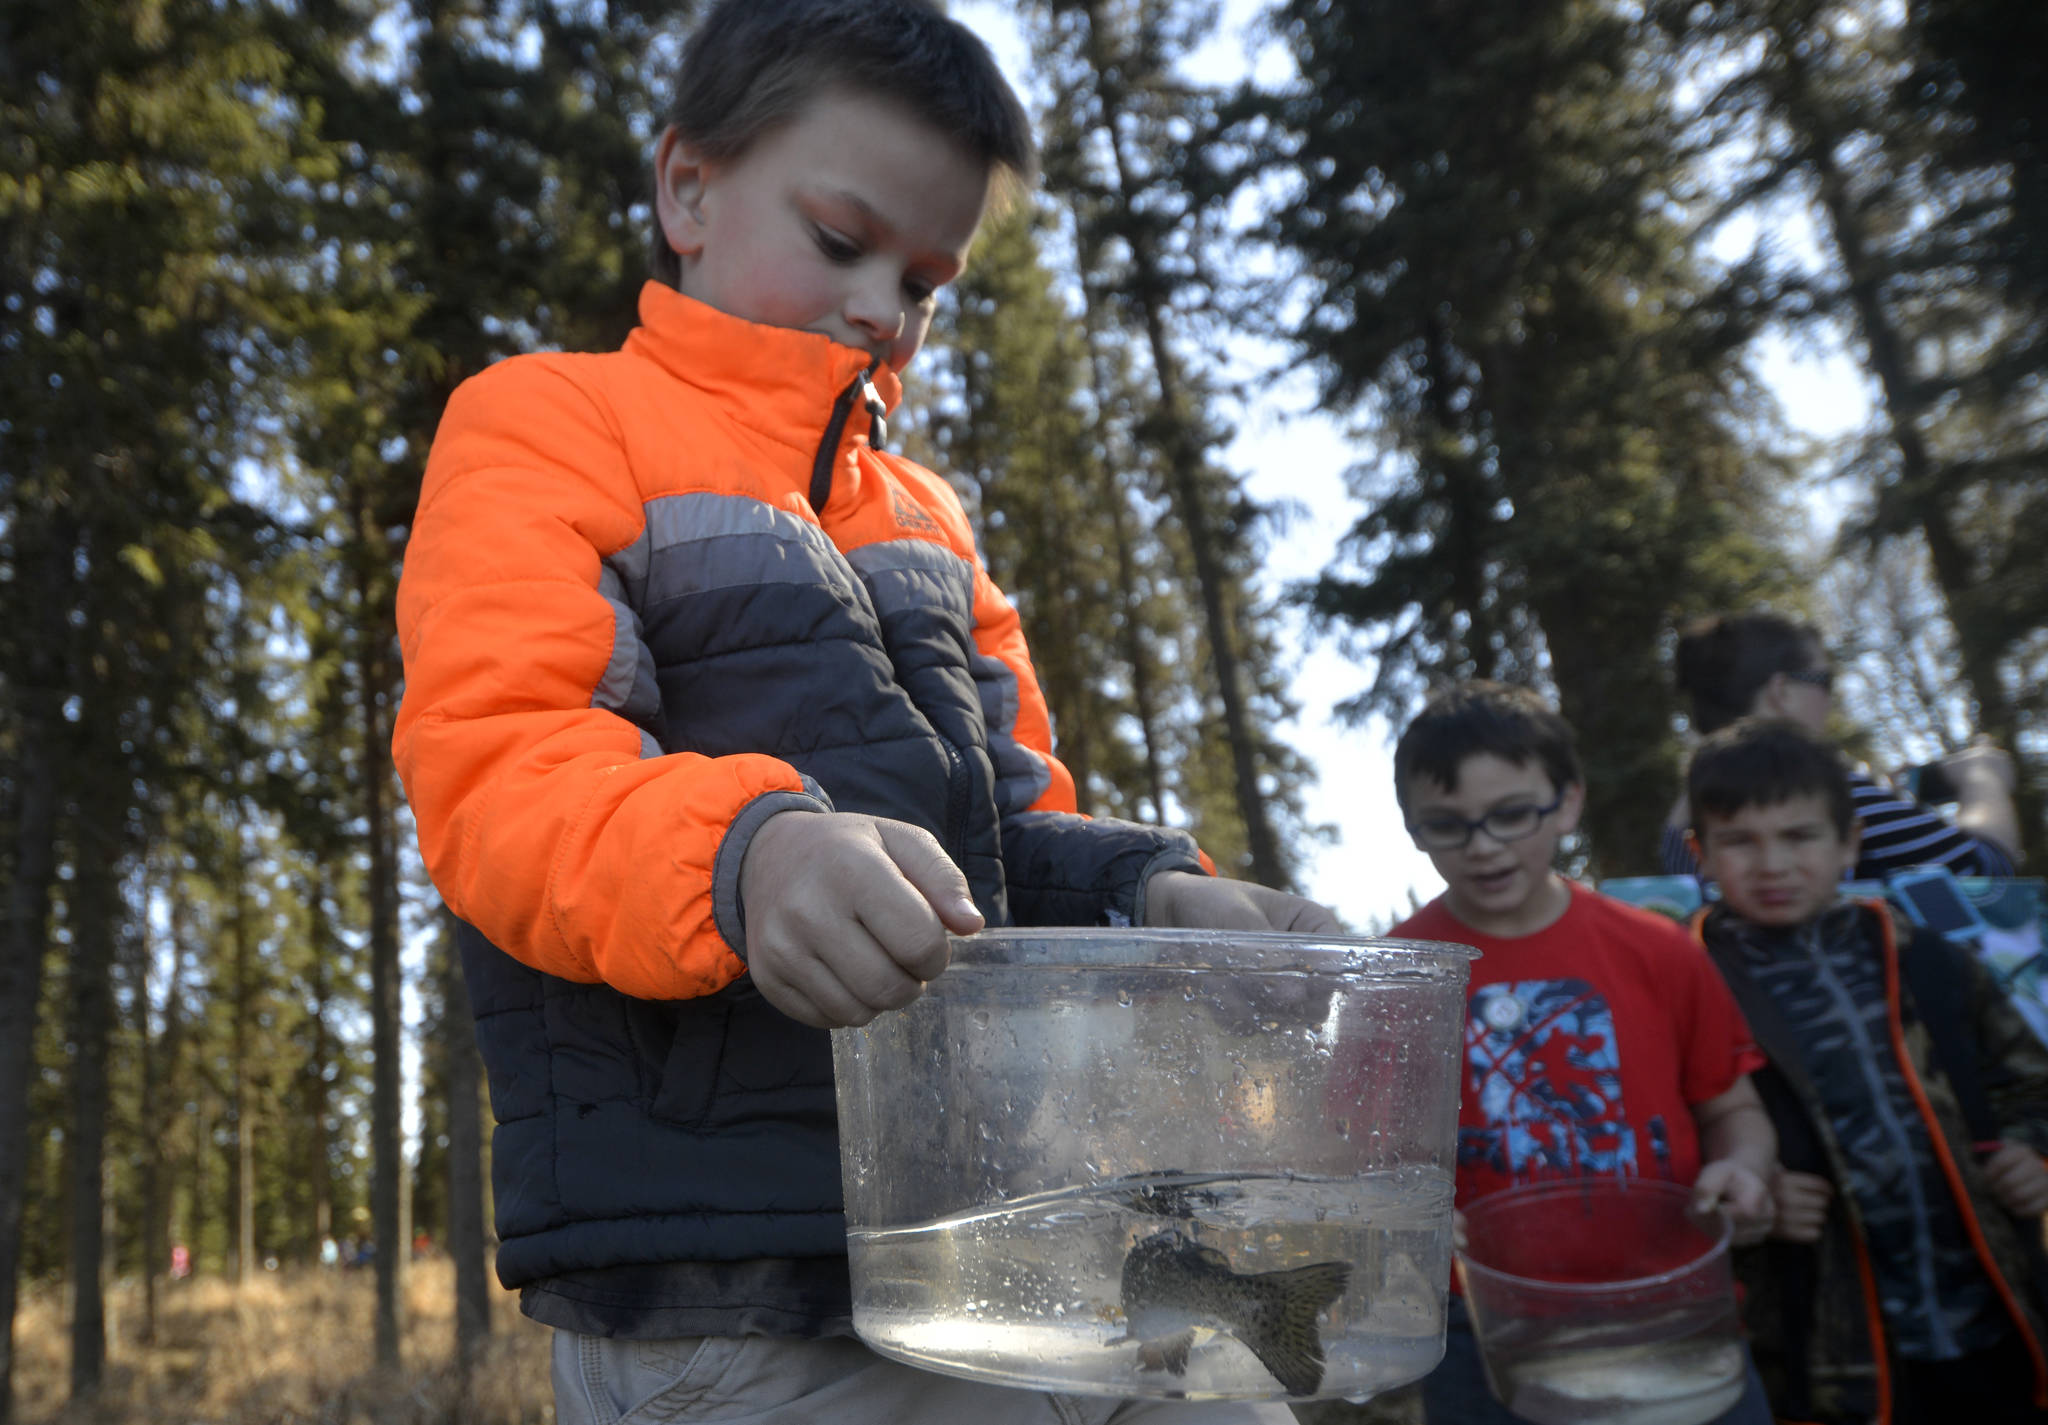 Kaden Bessette, a Soldotna Elementary school student, carefully carried his trout to Johnson Lake to be released during the Salmon Celebration on Thursday, May 11, 2017 in Kasilof, Alaska. (Kat Sorensen/Peninsula Clarion)